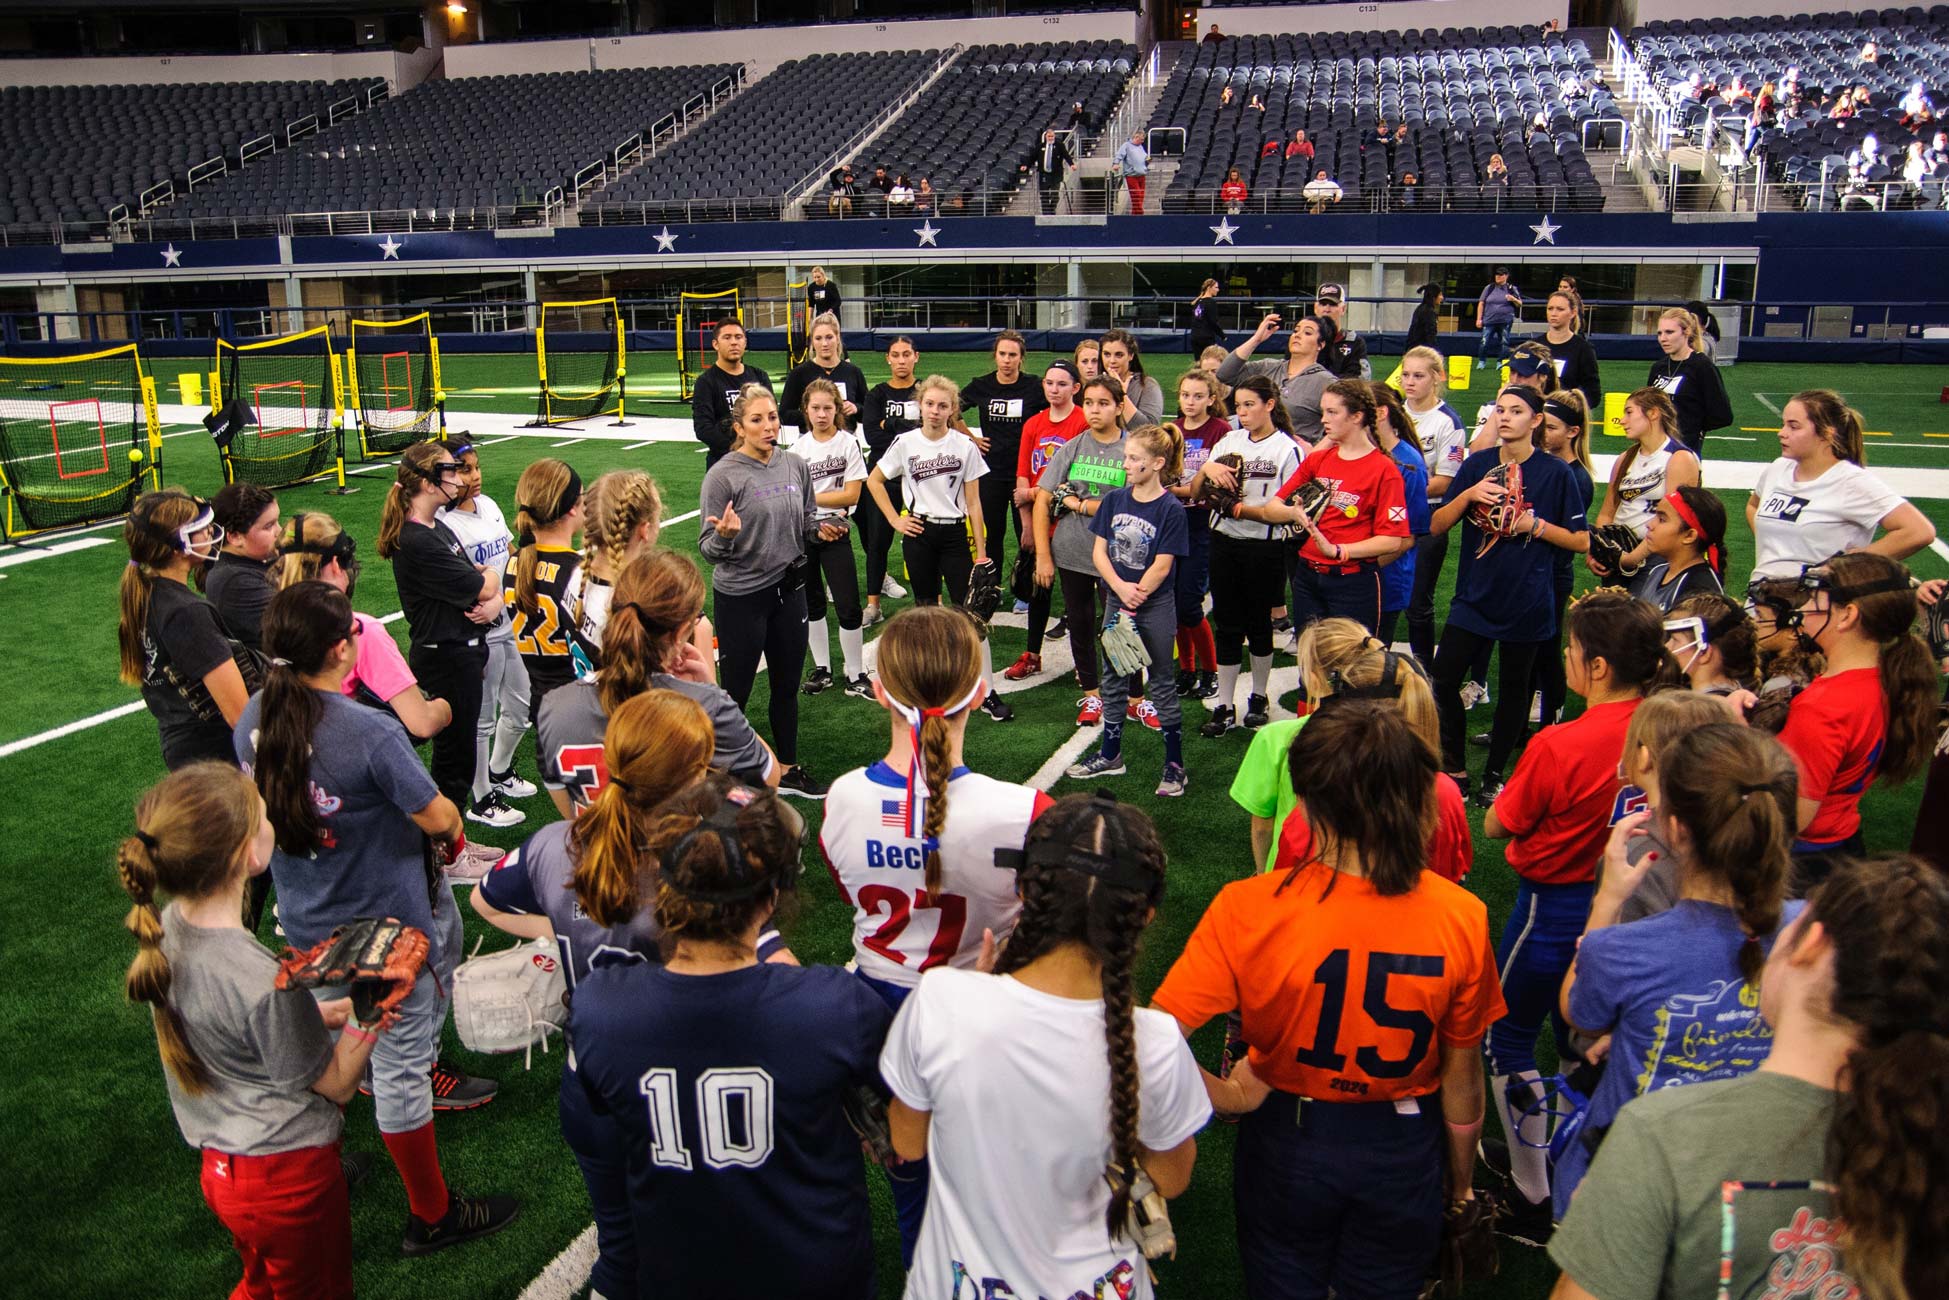 Amanda Scarborough speaking to a group of softball players on the field